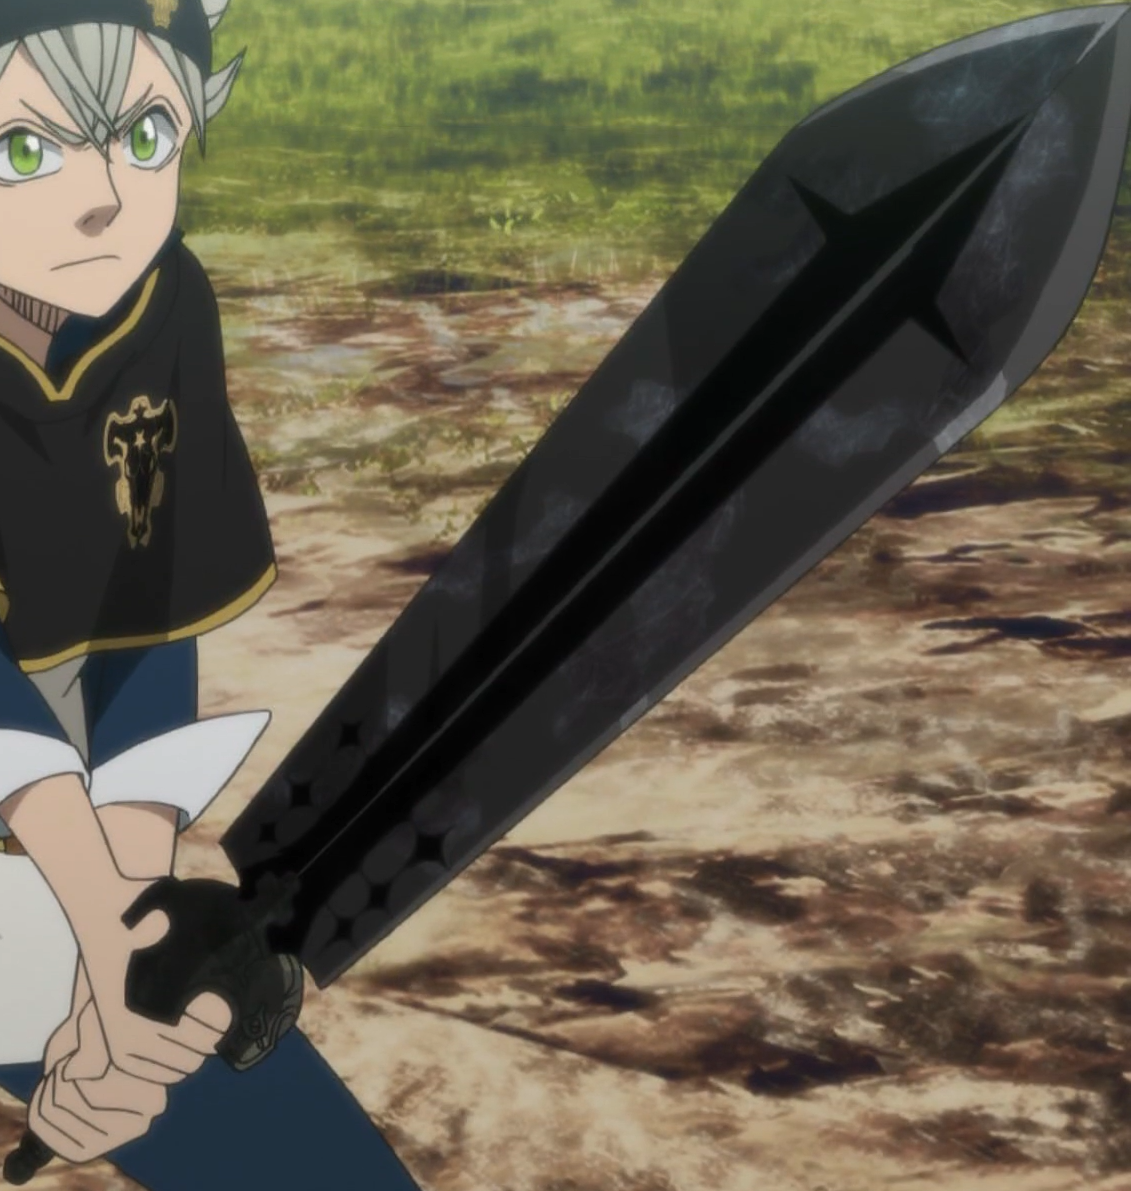 Is there an anime where the characters fight with a sword in a realistic  manner? - Quora